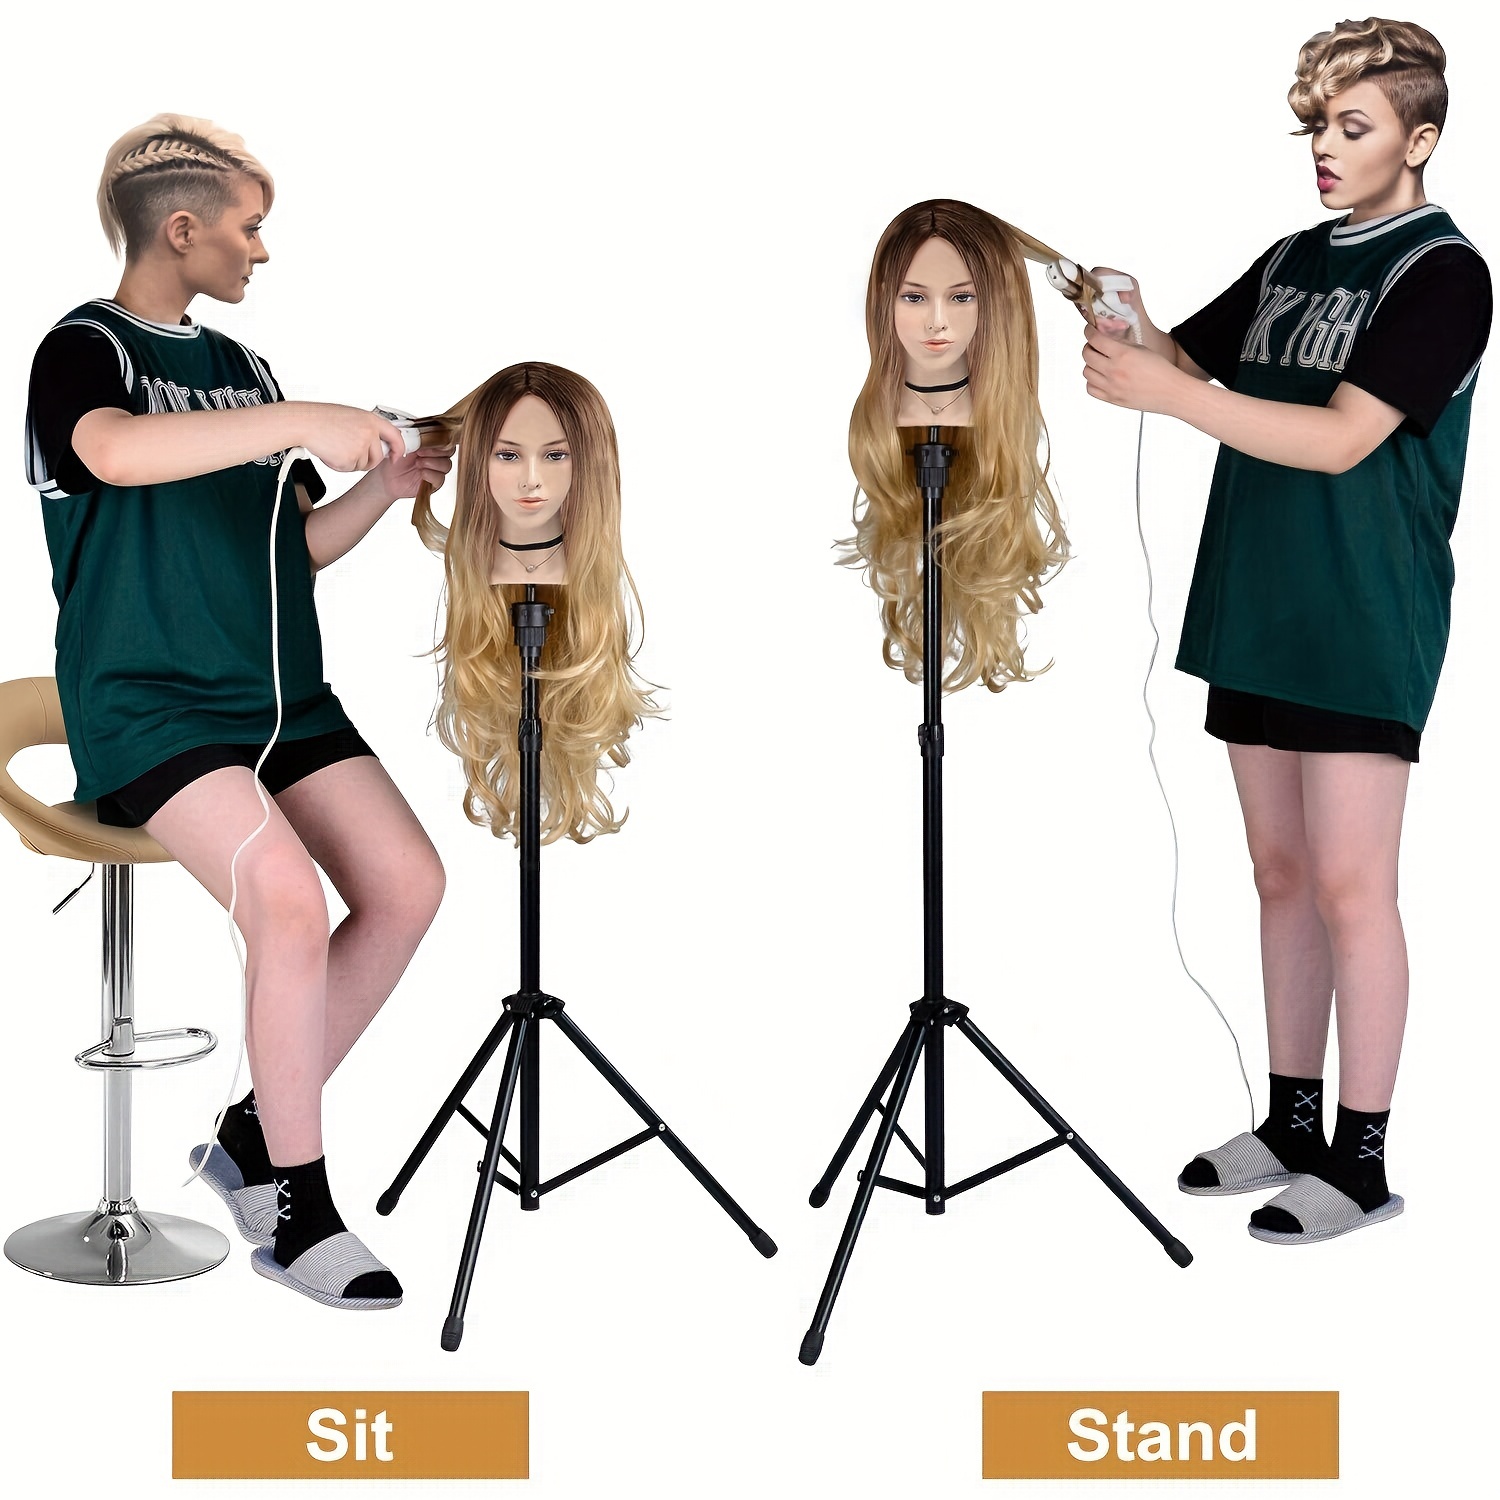 Reinforced Wig Stand Tripod Mannequin Head Stand, Adjustable Holder For  Cosmetology Hairdressing Training With T-with Caps, T-Pins, Comb, Hair  Clip, C